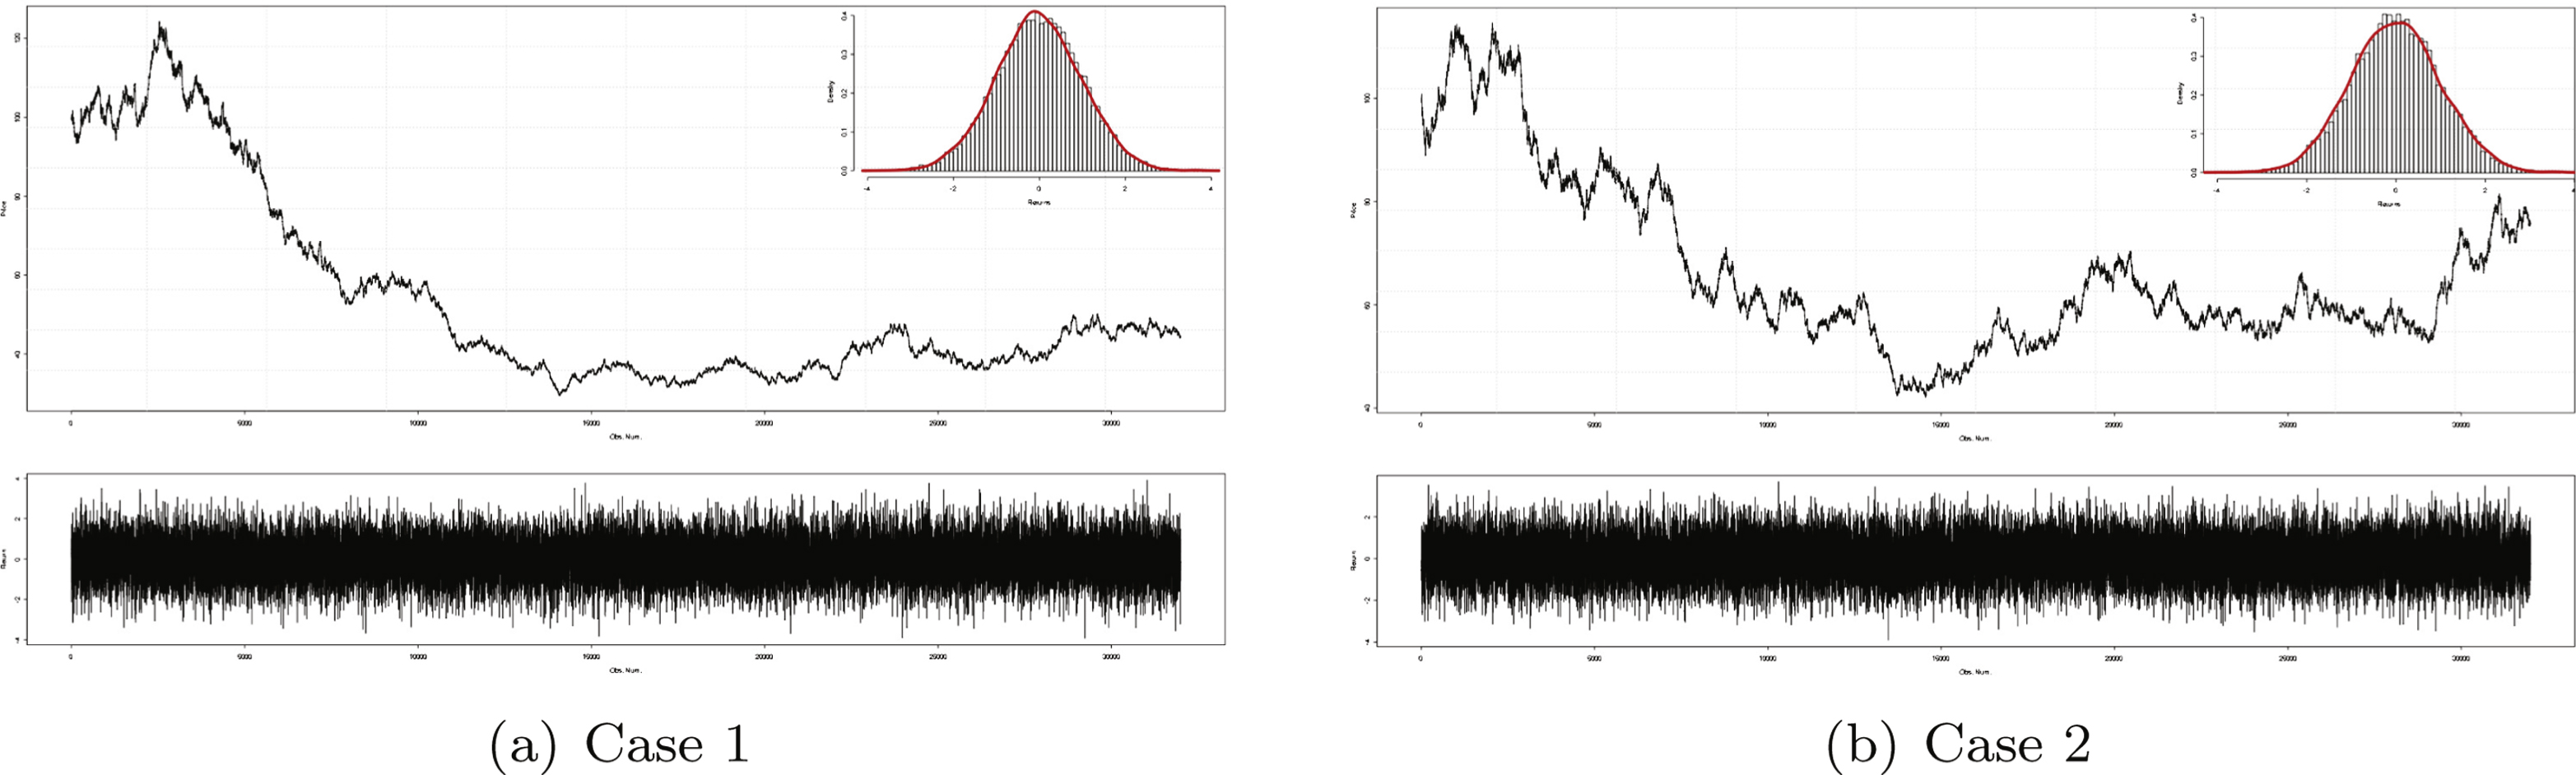 Simulated returns with two important structures. On the top of each figure, we plotted
the pseudo price series obtained from chron with an initial price of 100. At the bottom, we plotted
the simulated return series chron.